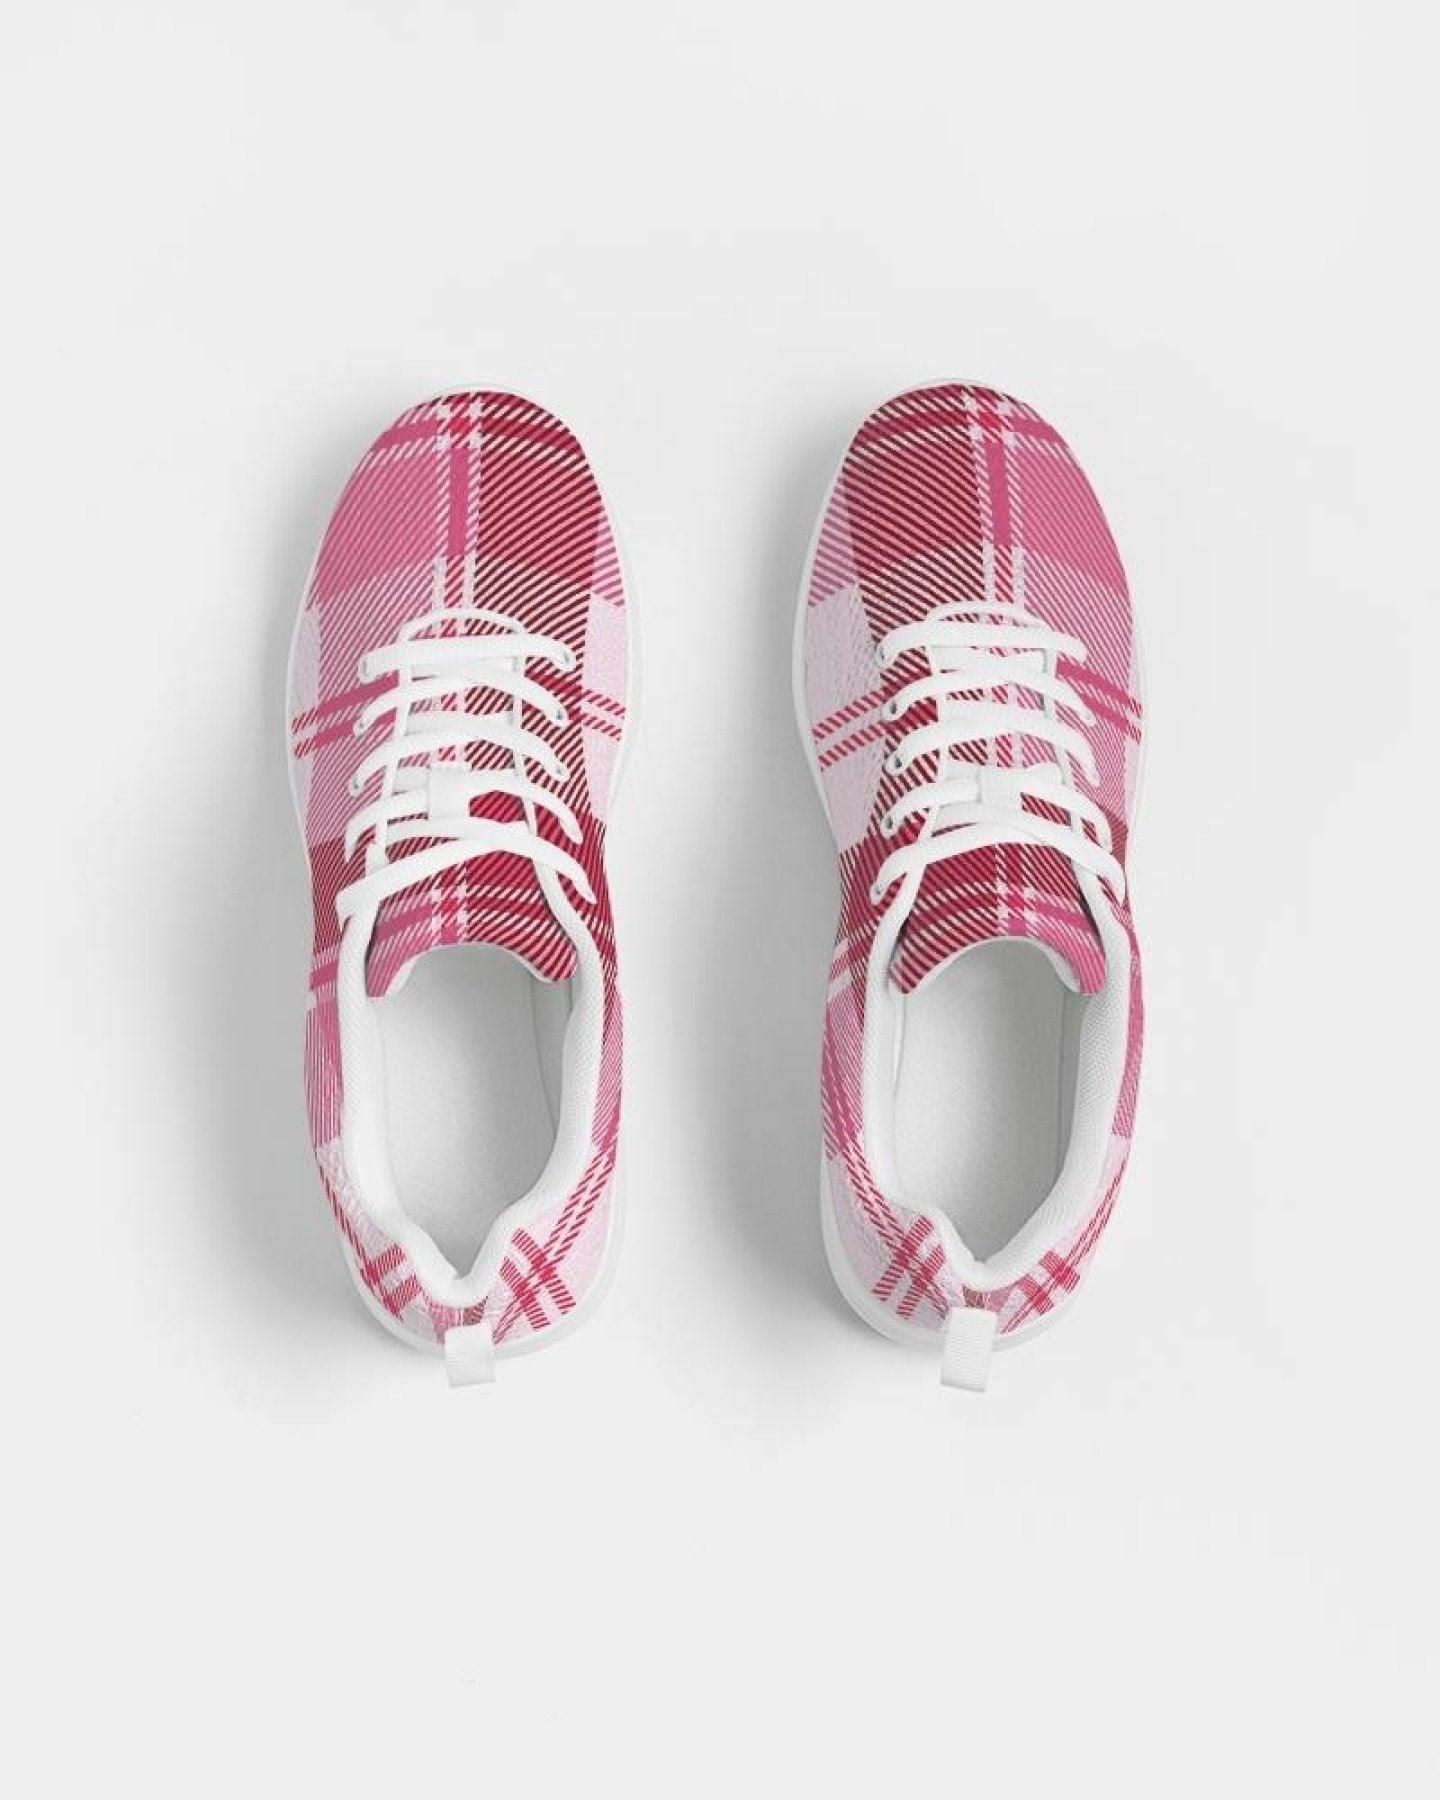 Womens Sneakers - Pink and White Plaid Running Sports Shoes